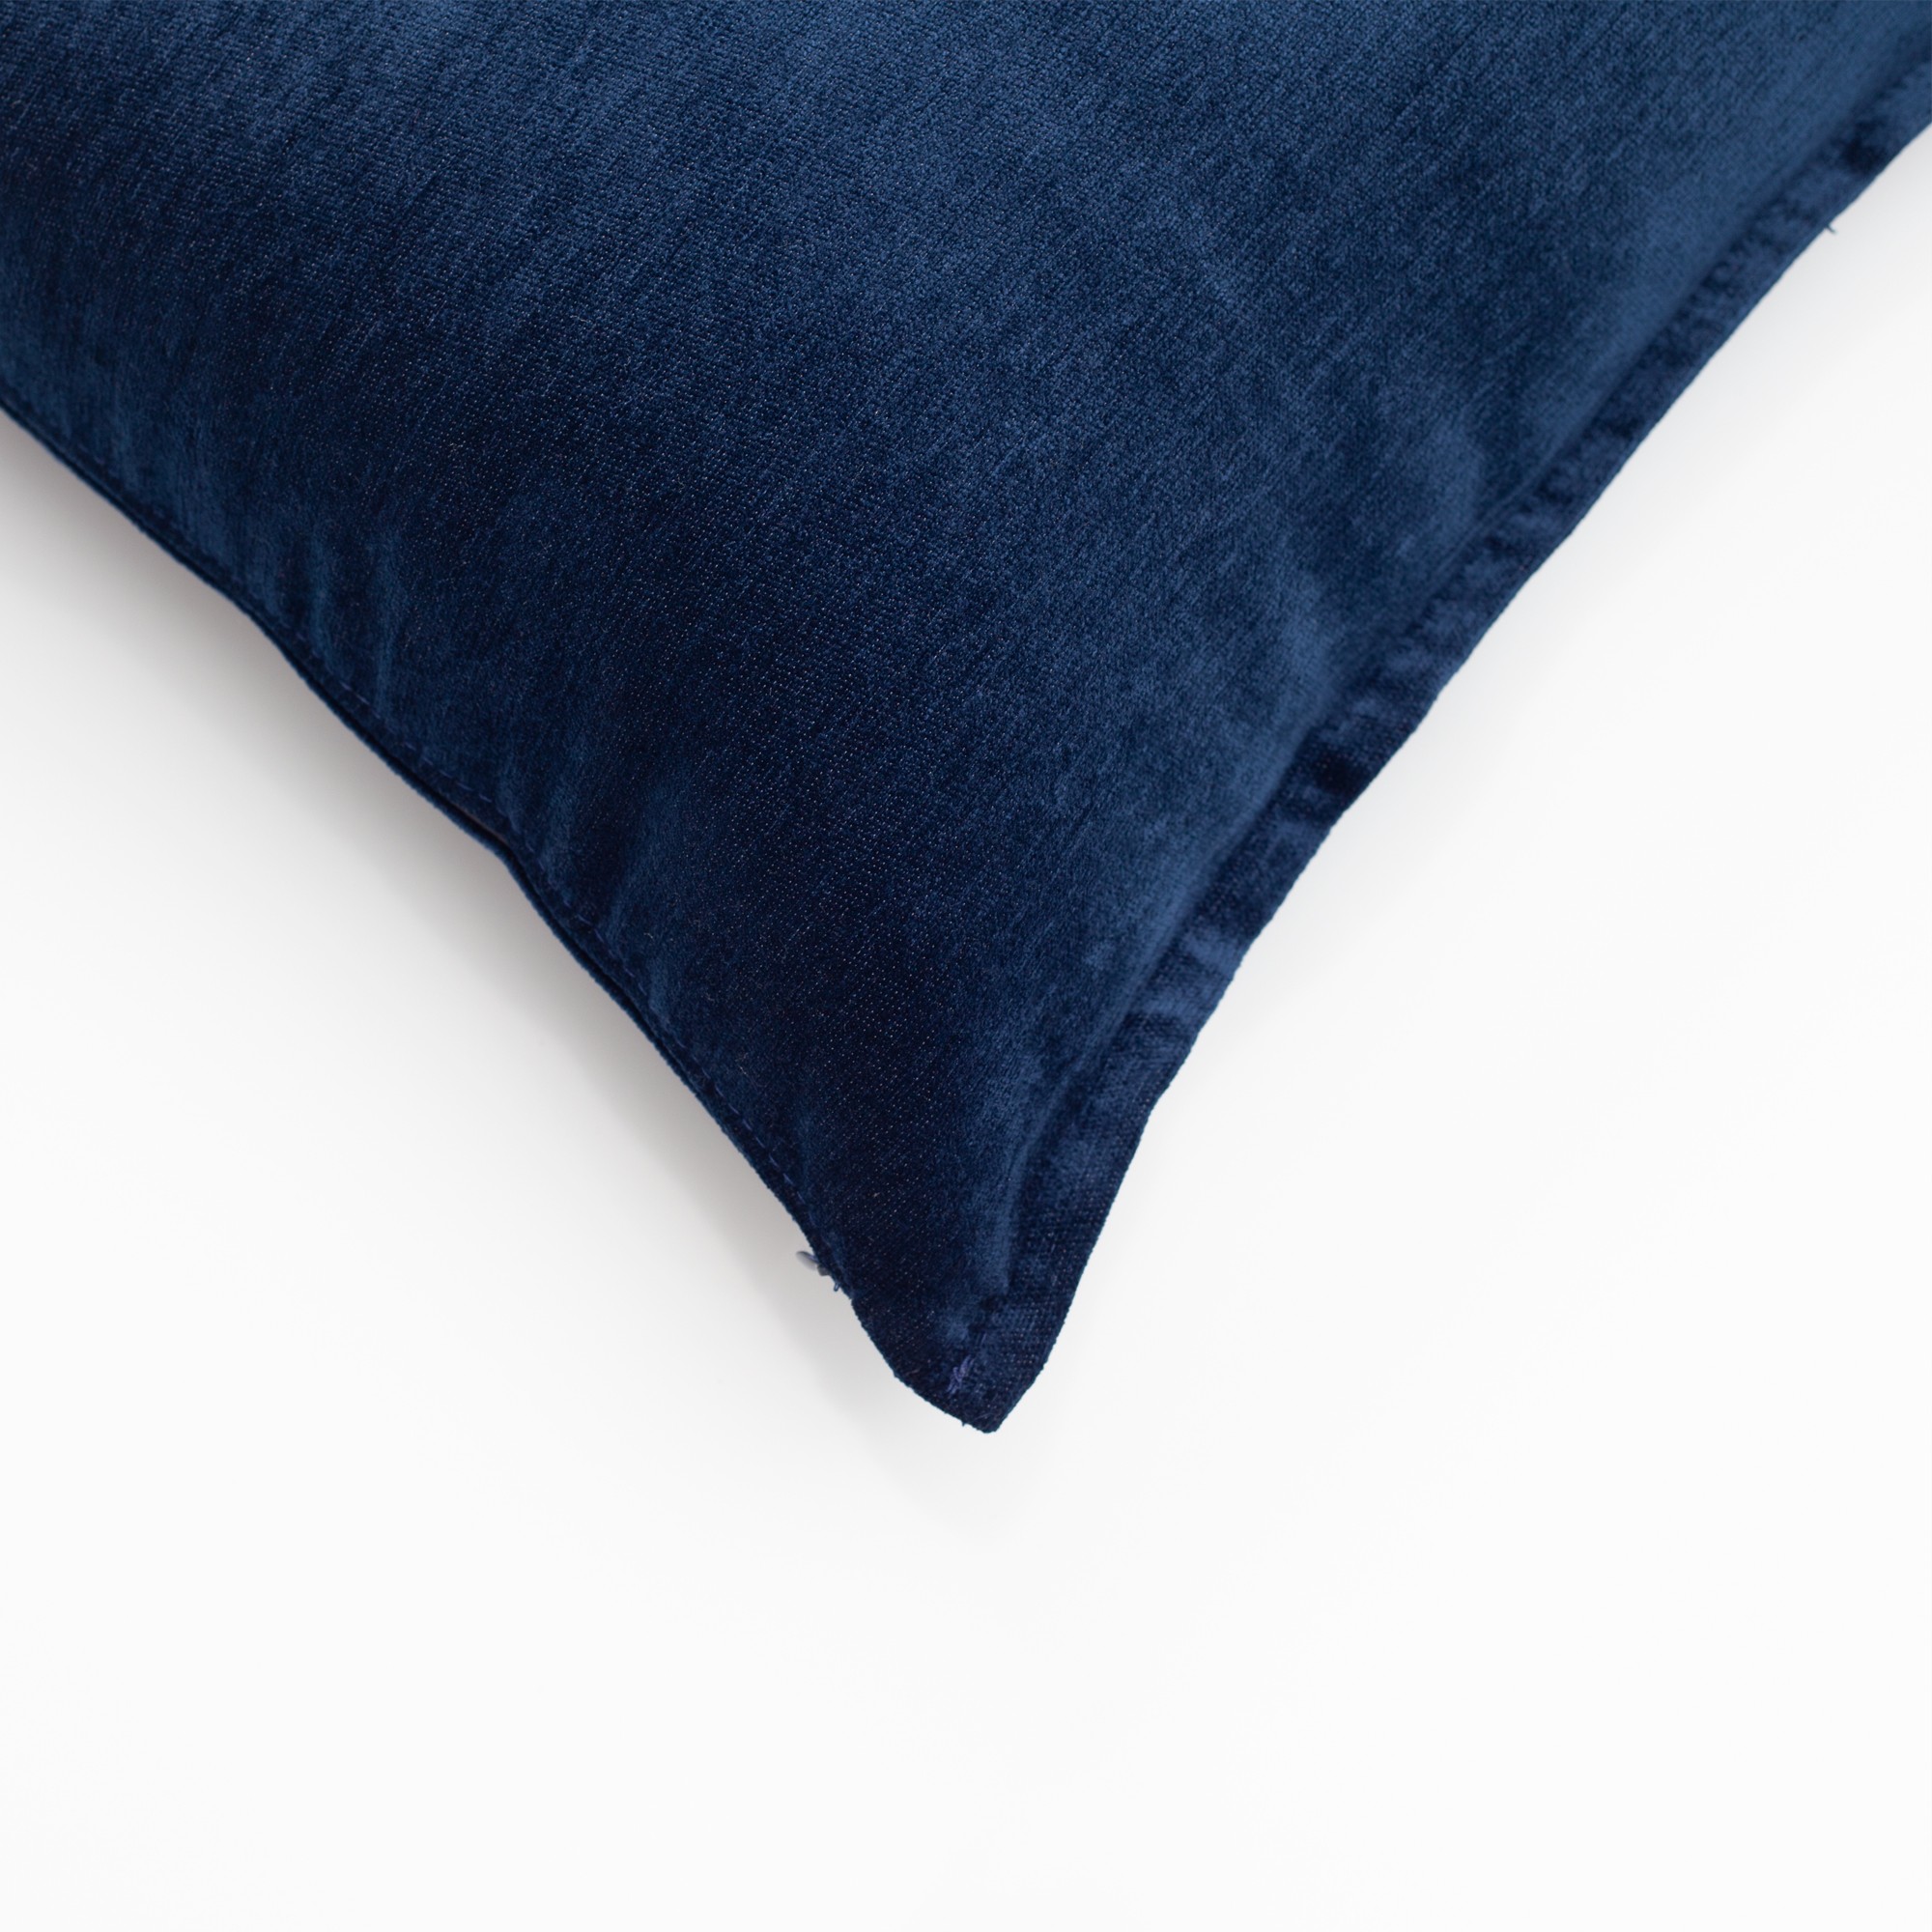 "Eliza" - Viscose Natural Linen Pillow 20x20 Inch - Navy Blue (Cover Only)